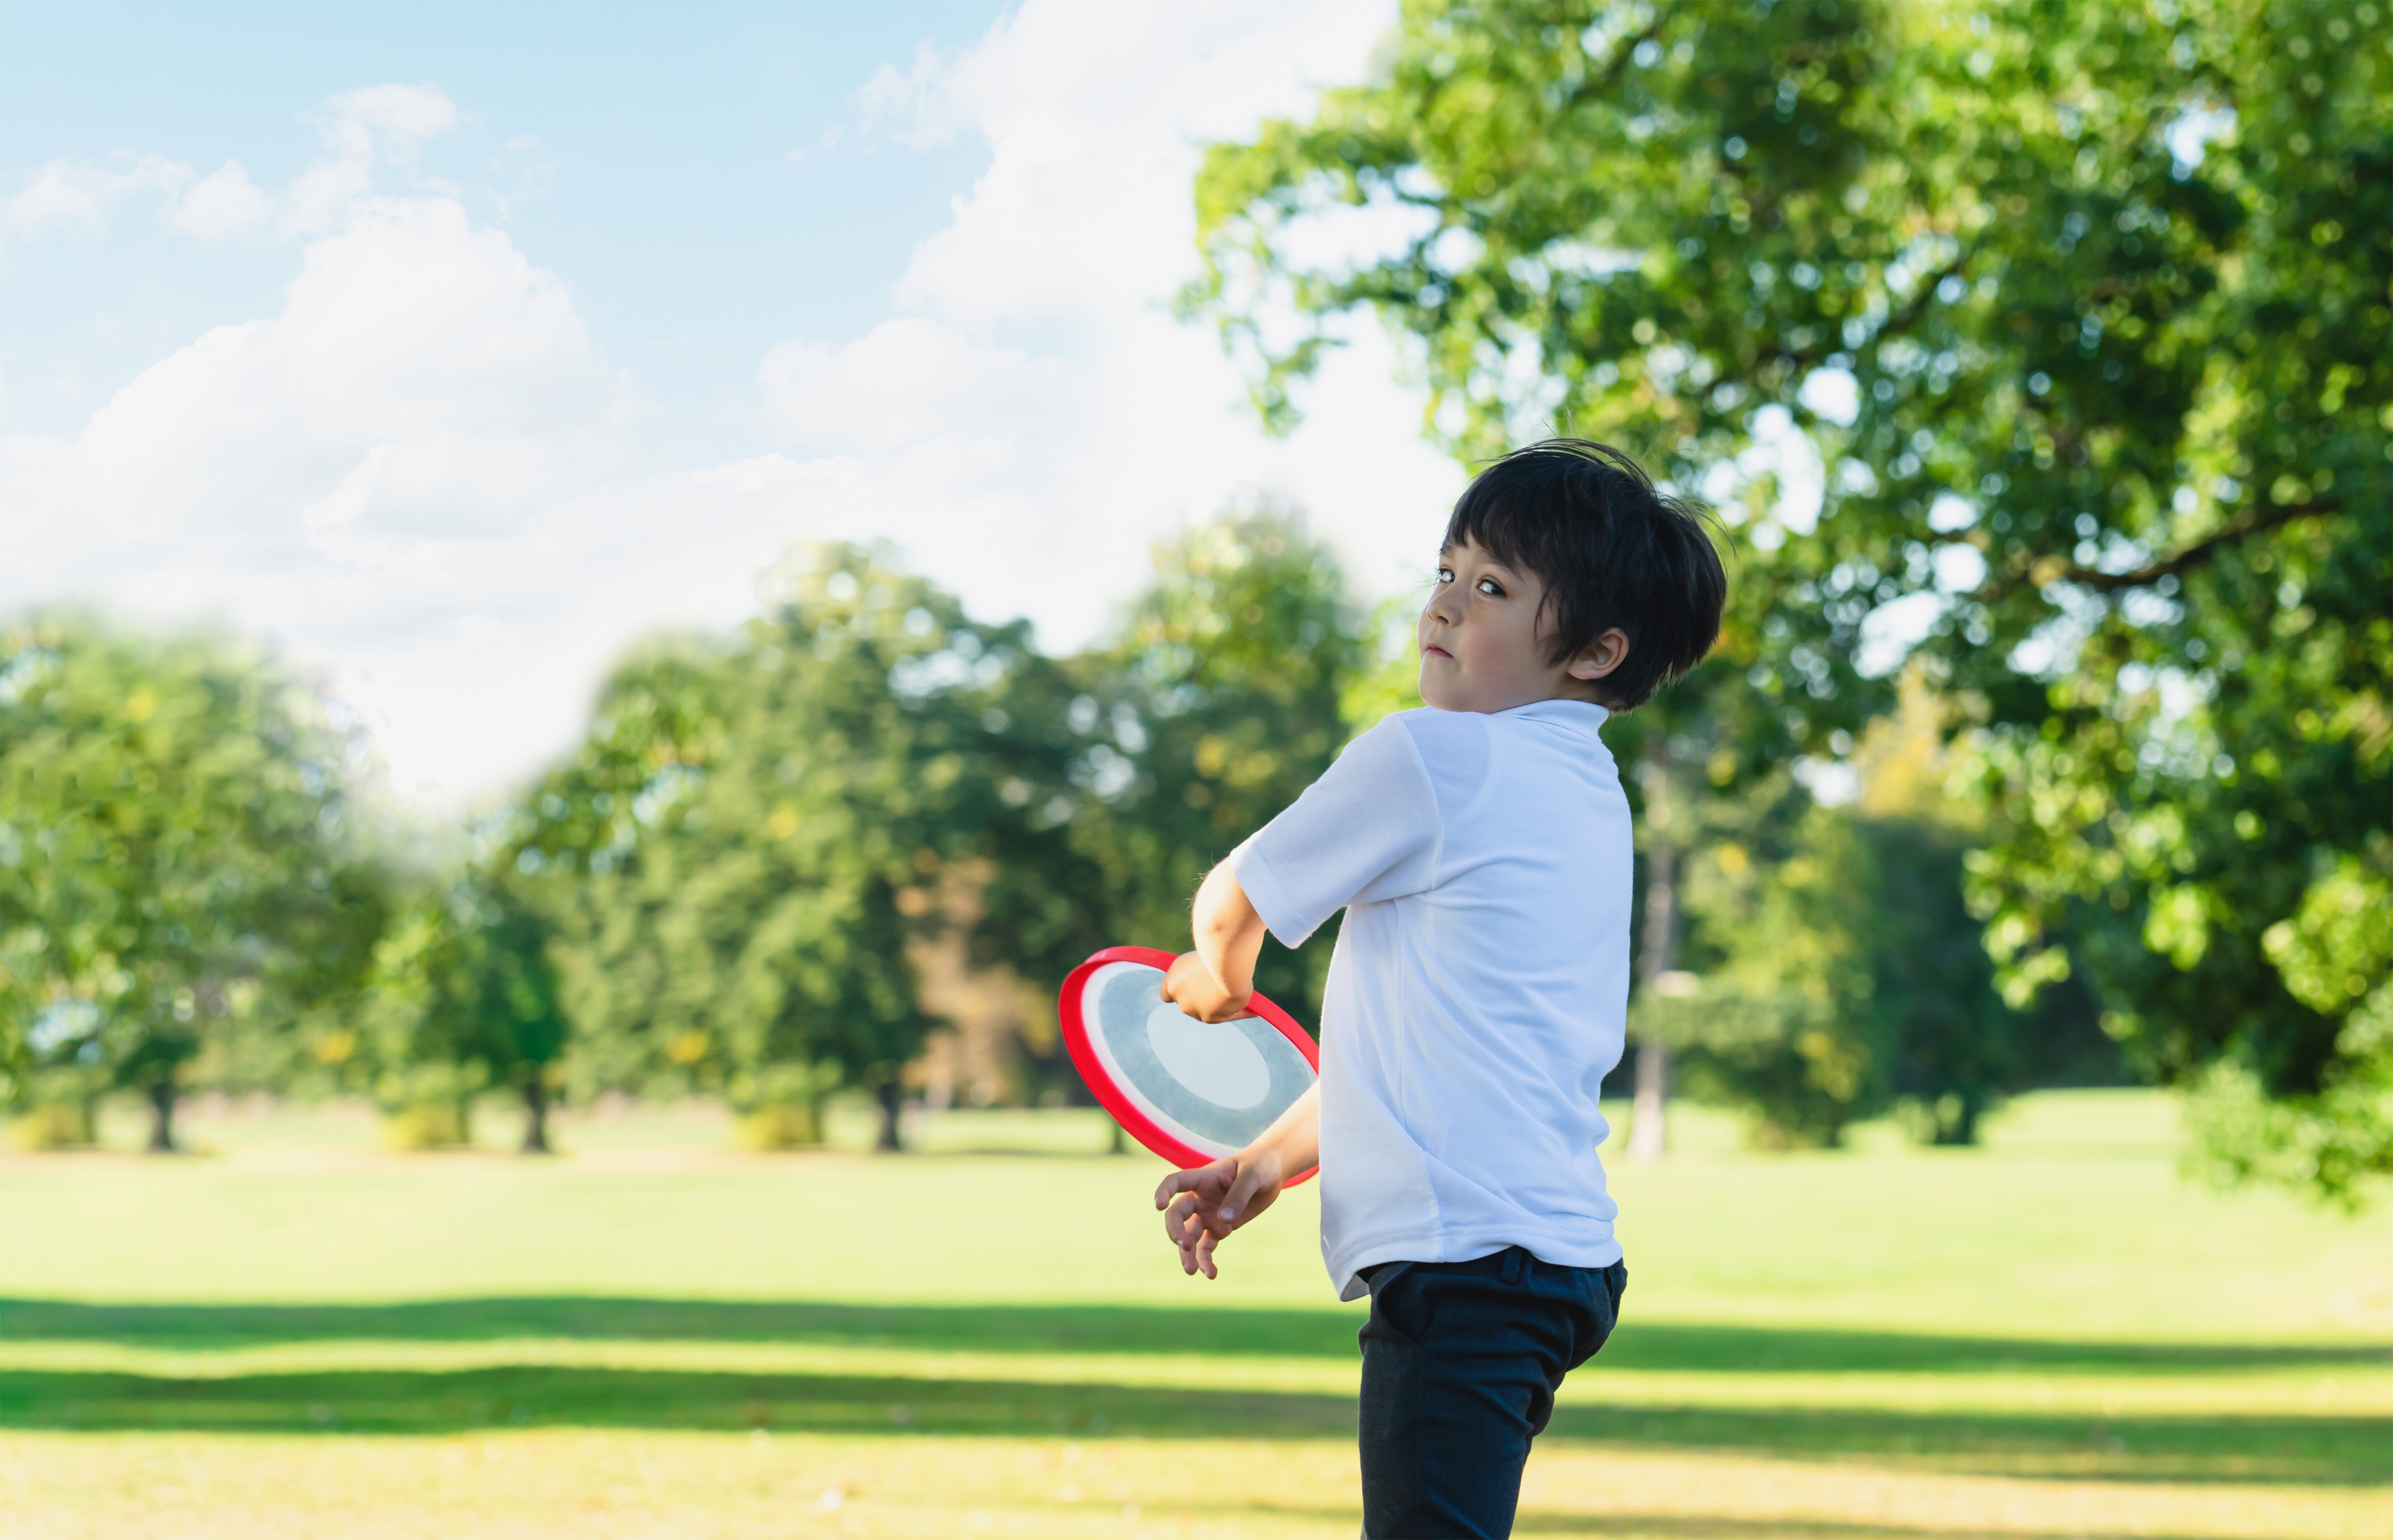 Portrait Of Happy School Kid Playing In The Park, Child Having F